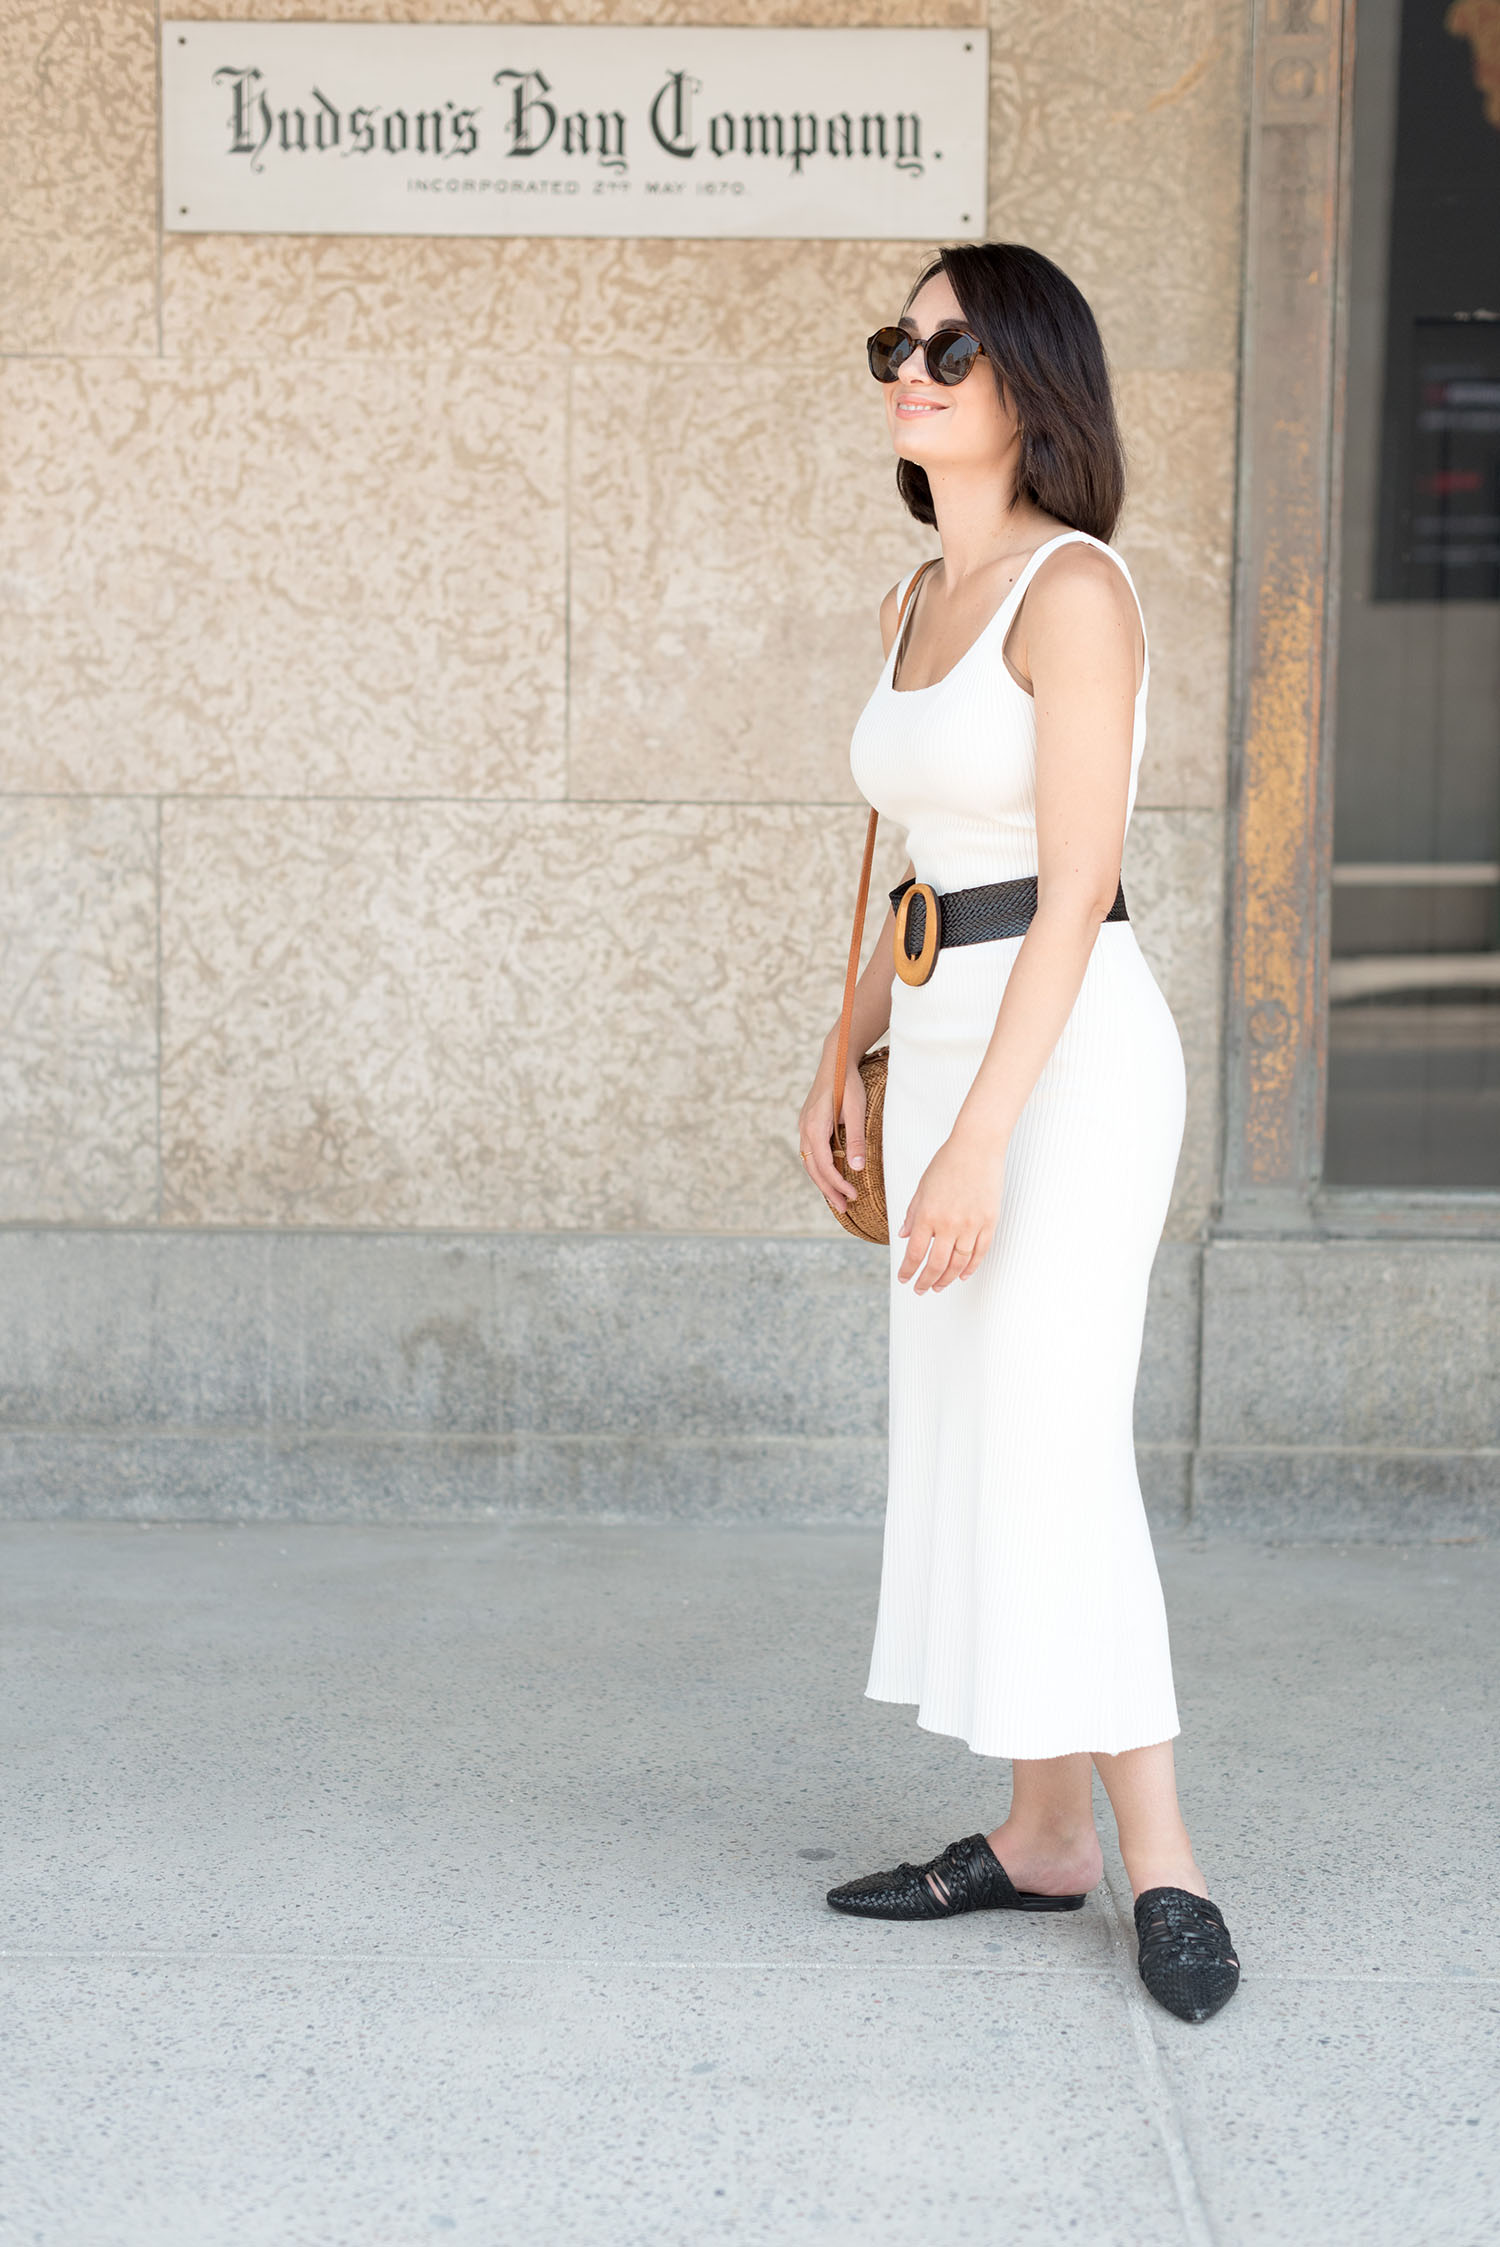 Top Winnipeg fashion blogger Cee Fardoe of Coco & Vera wears a Mango ribbed dress and & Other Stories sunglasses at The Bay Downtown in Winnipeg